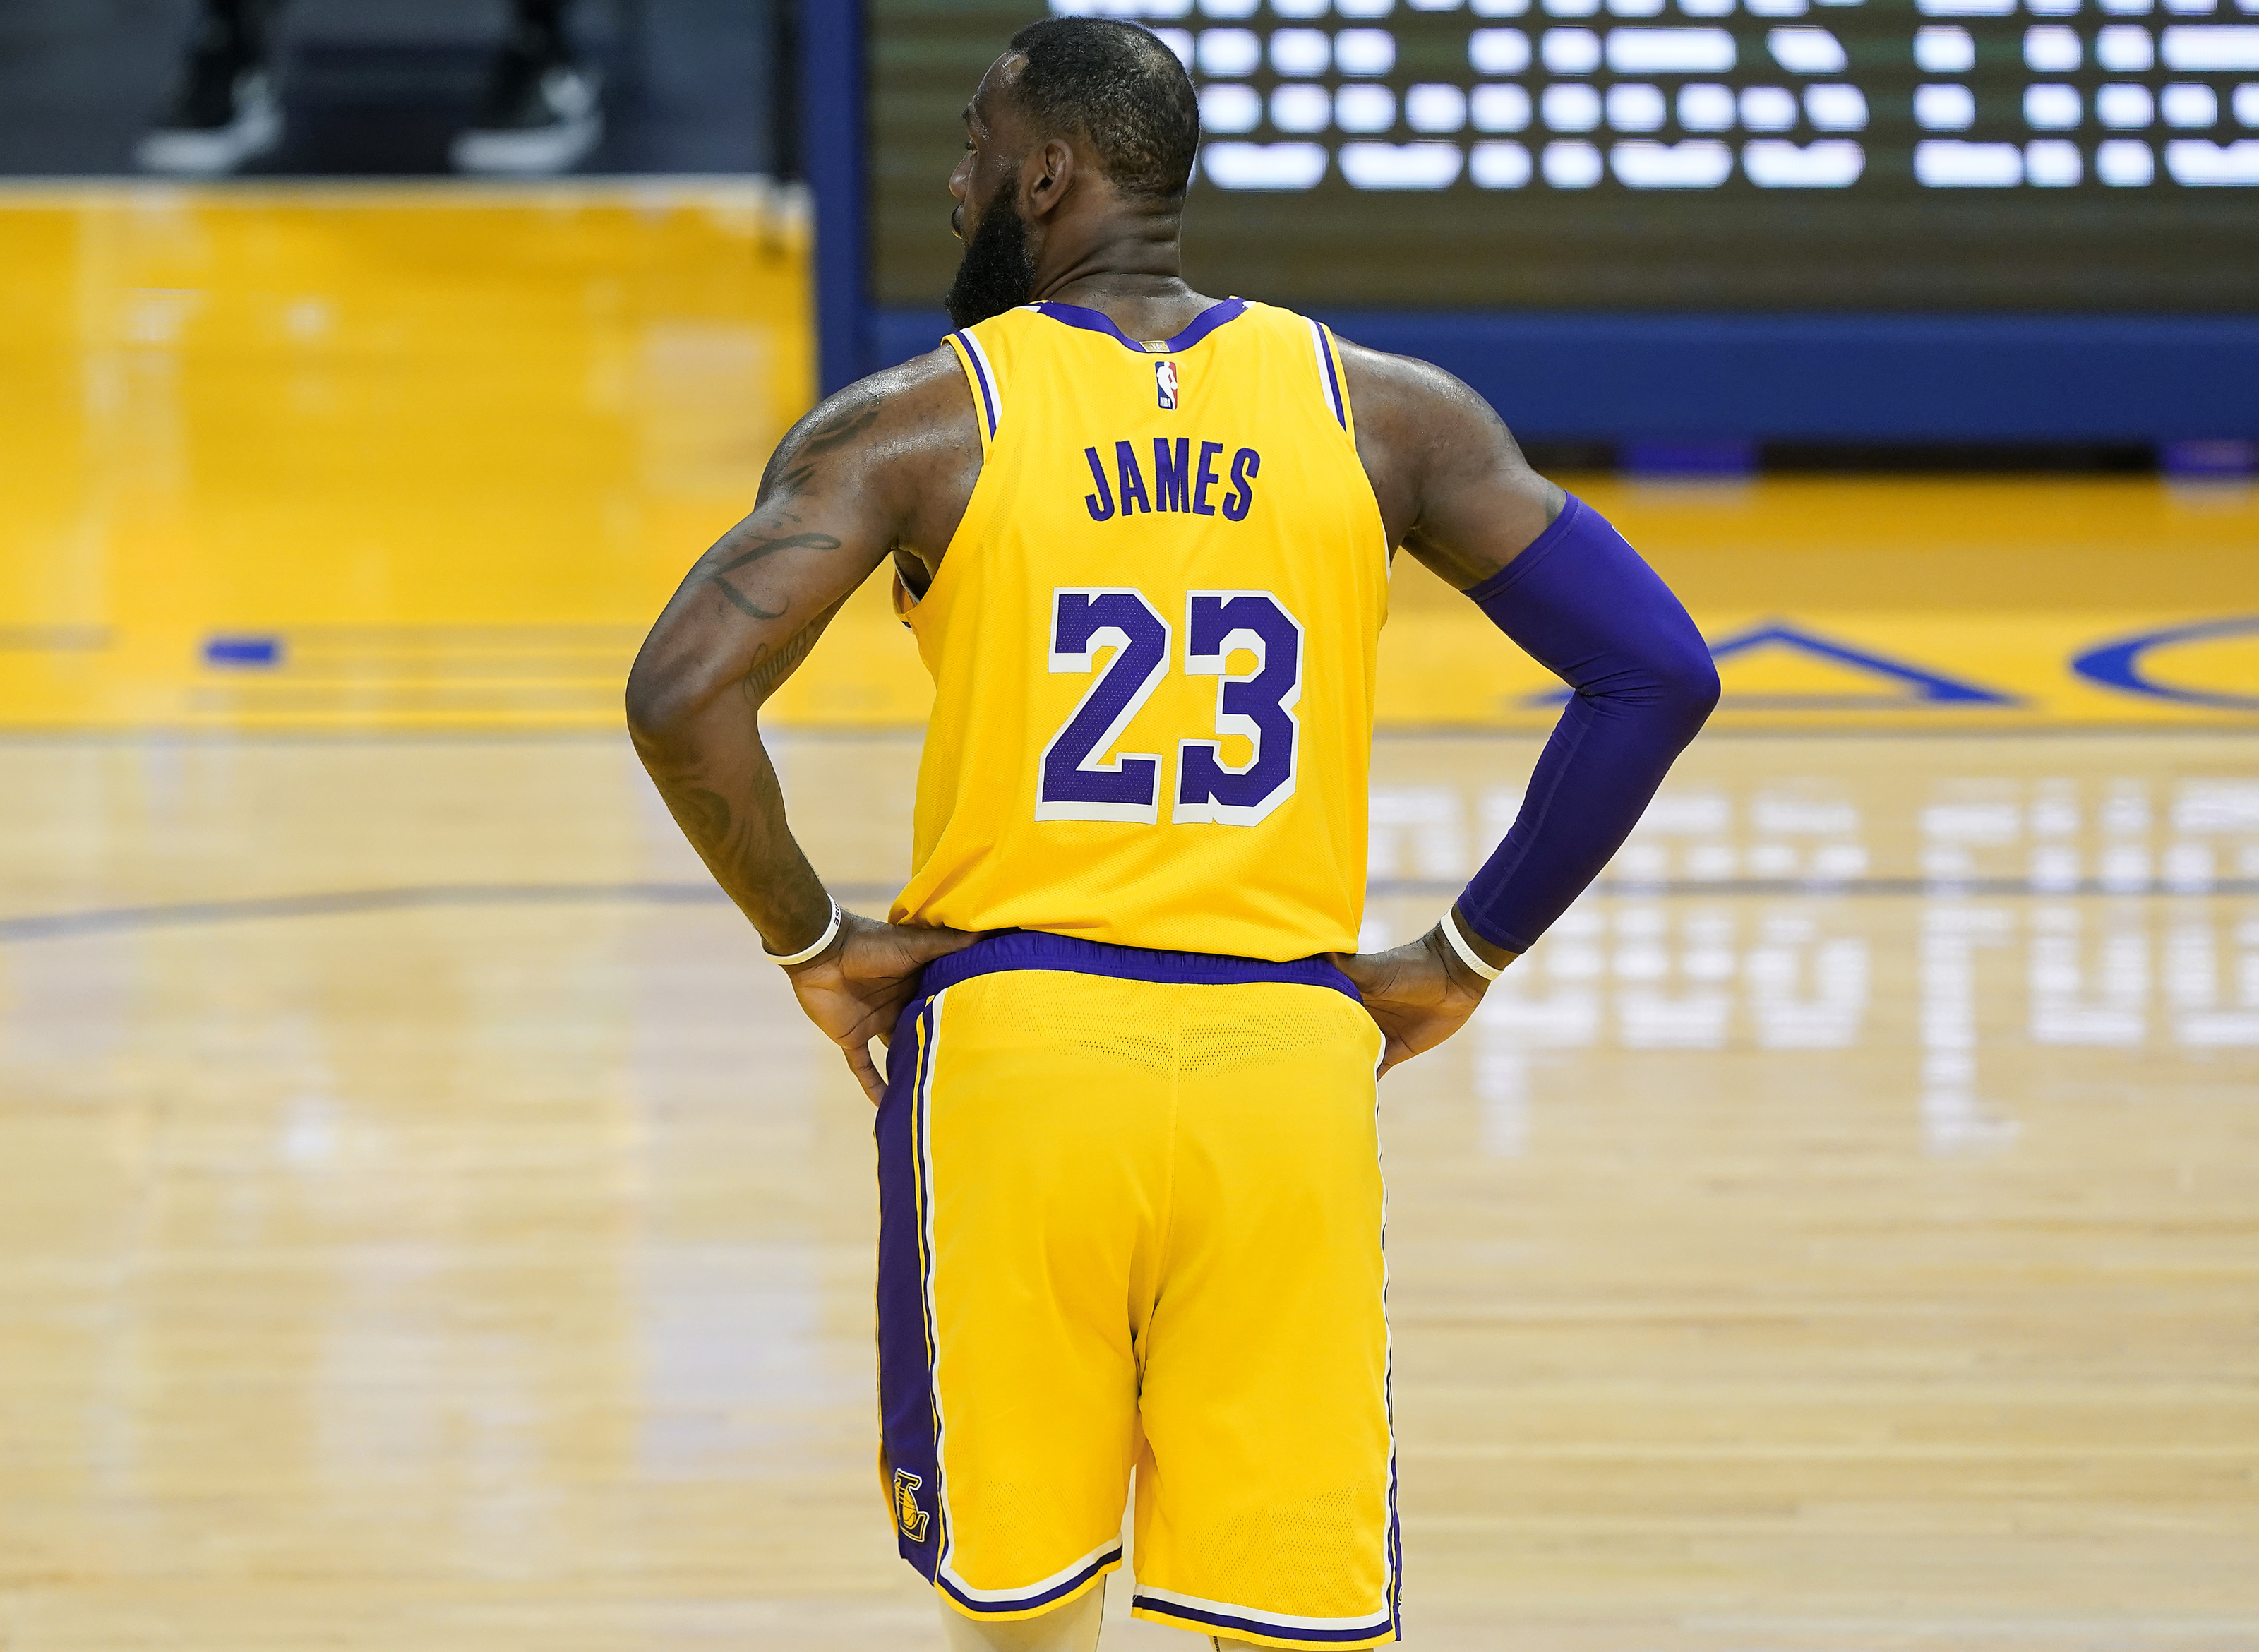 Lakers LeBron James is better than Cleveland or Miami LeBron